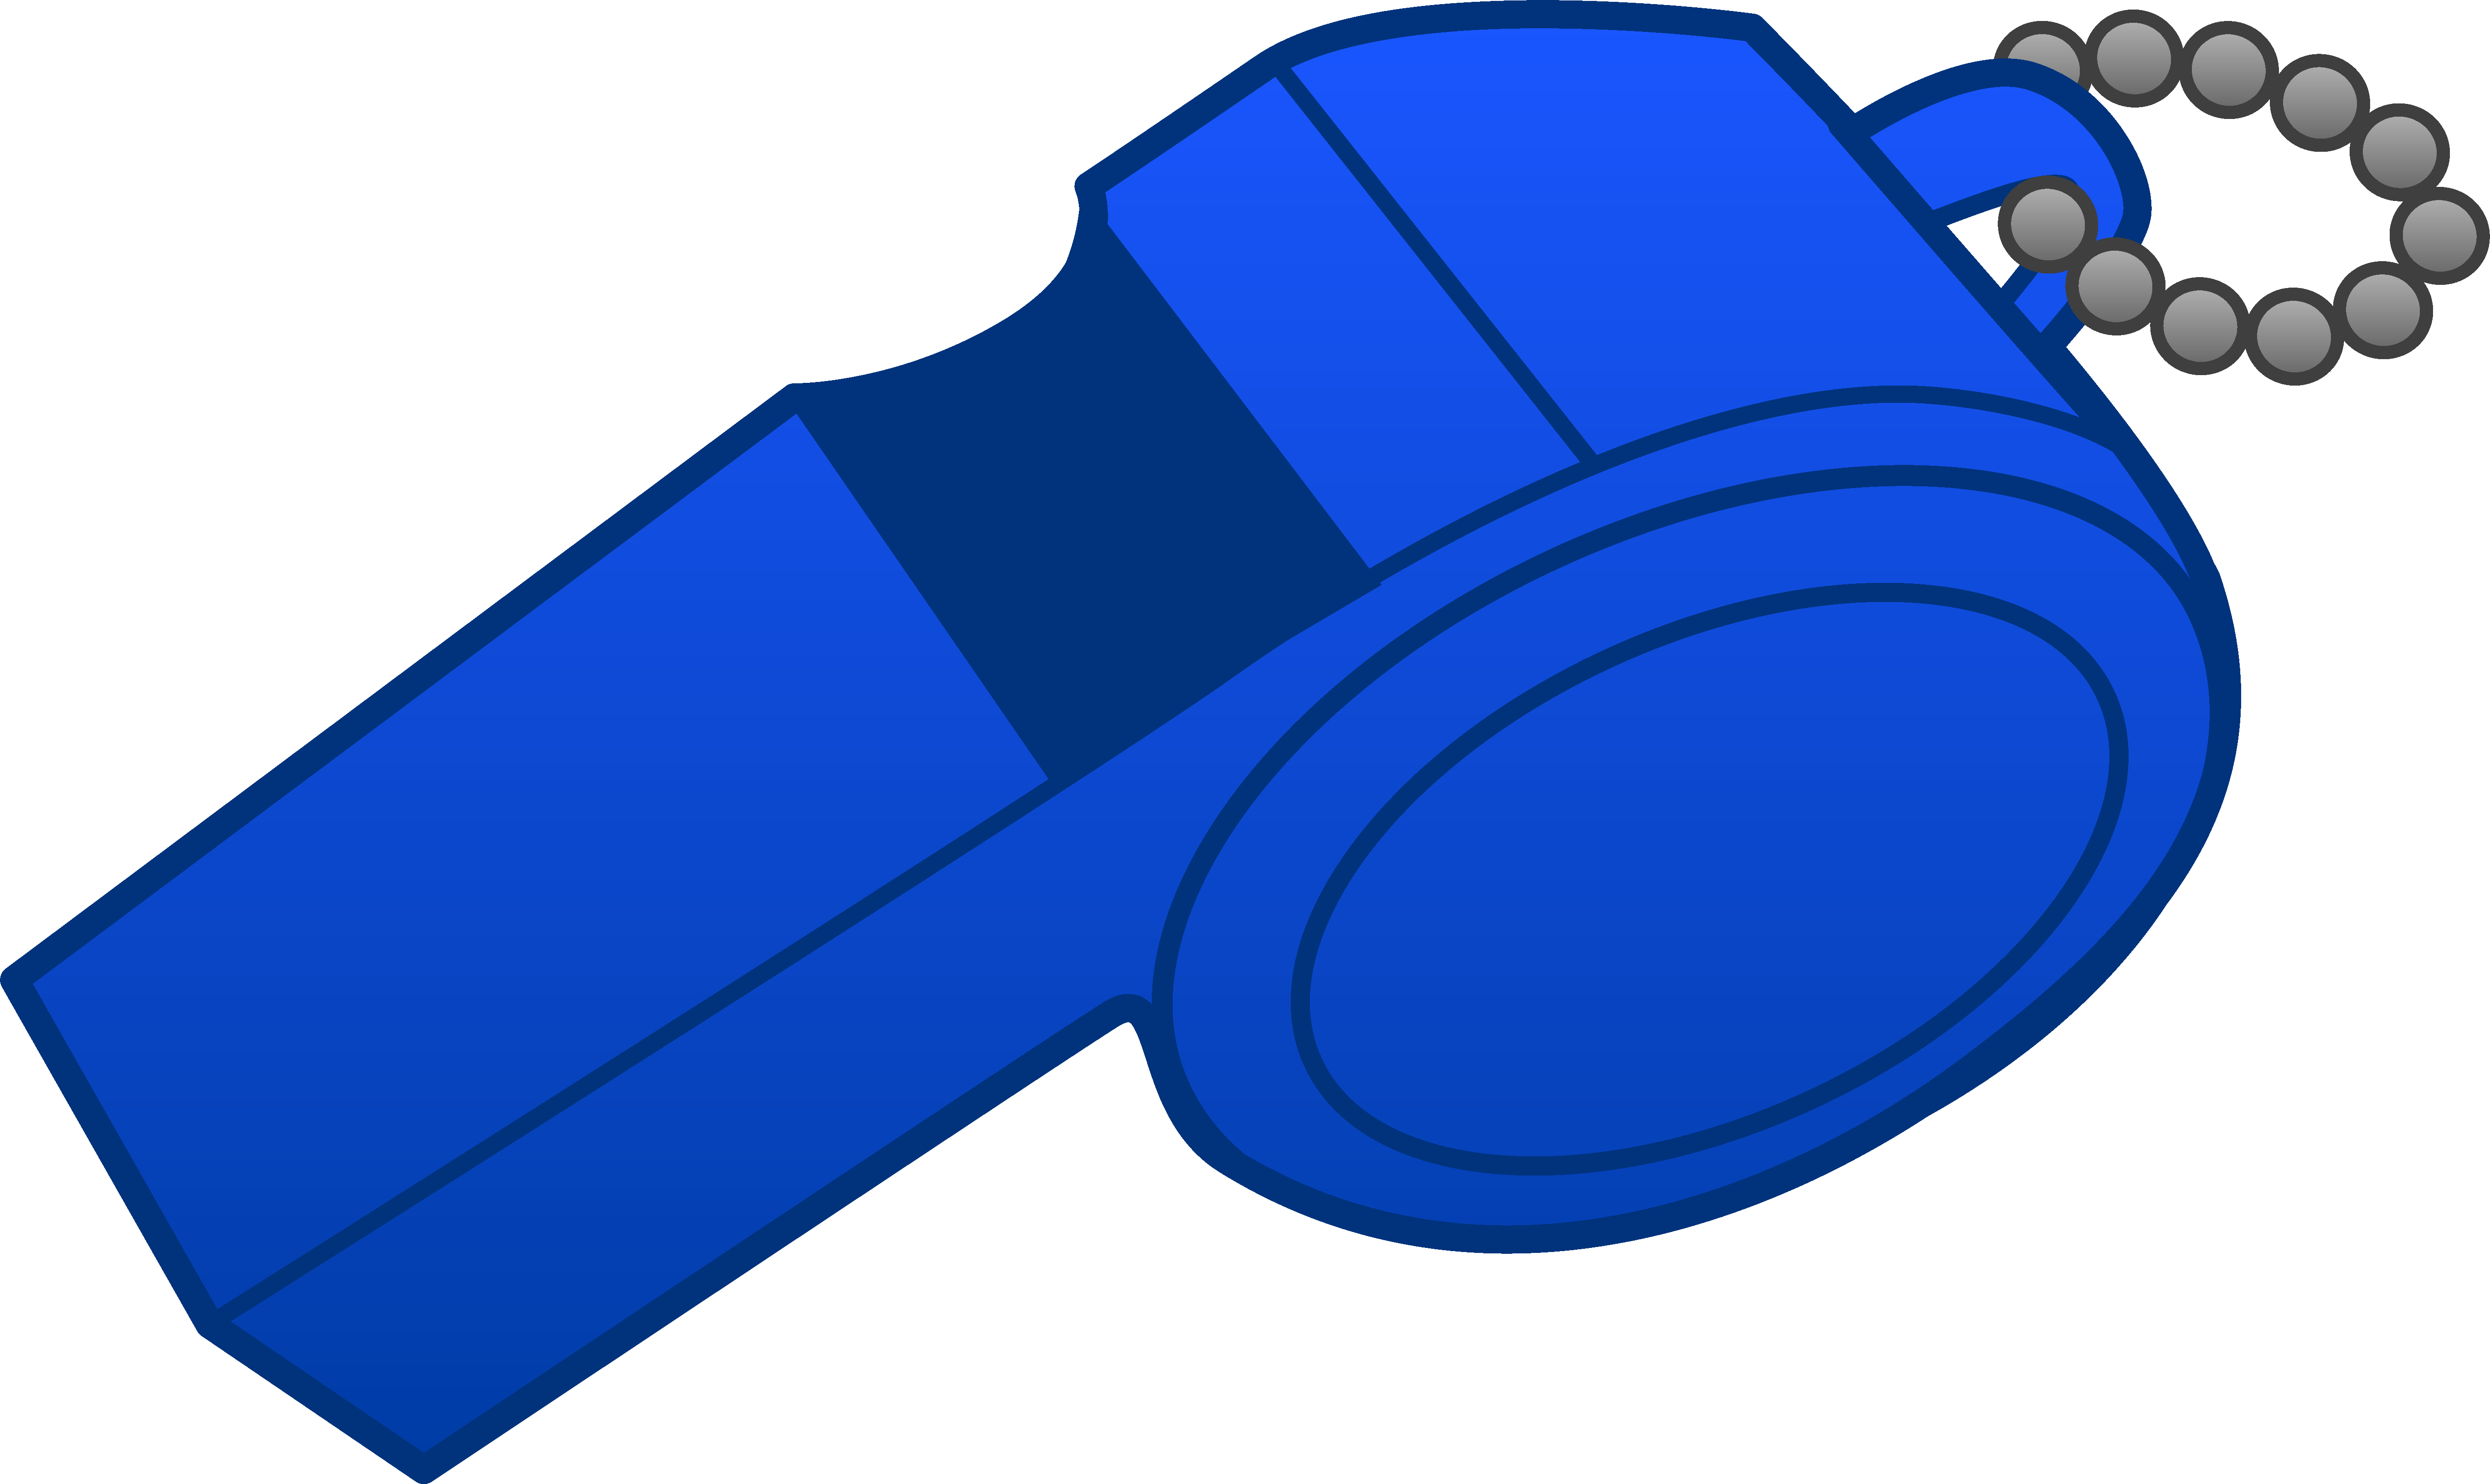 blue objects clipart - photo #18